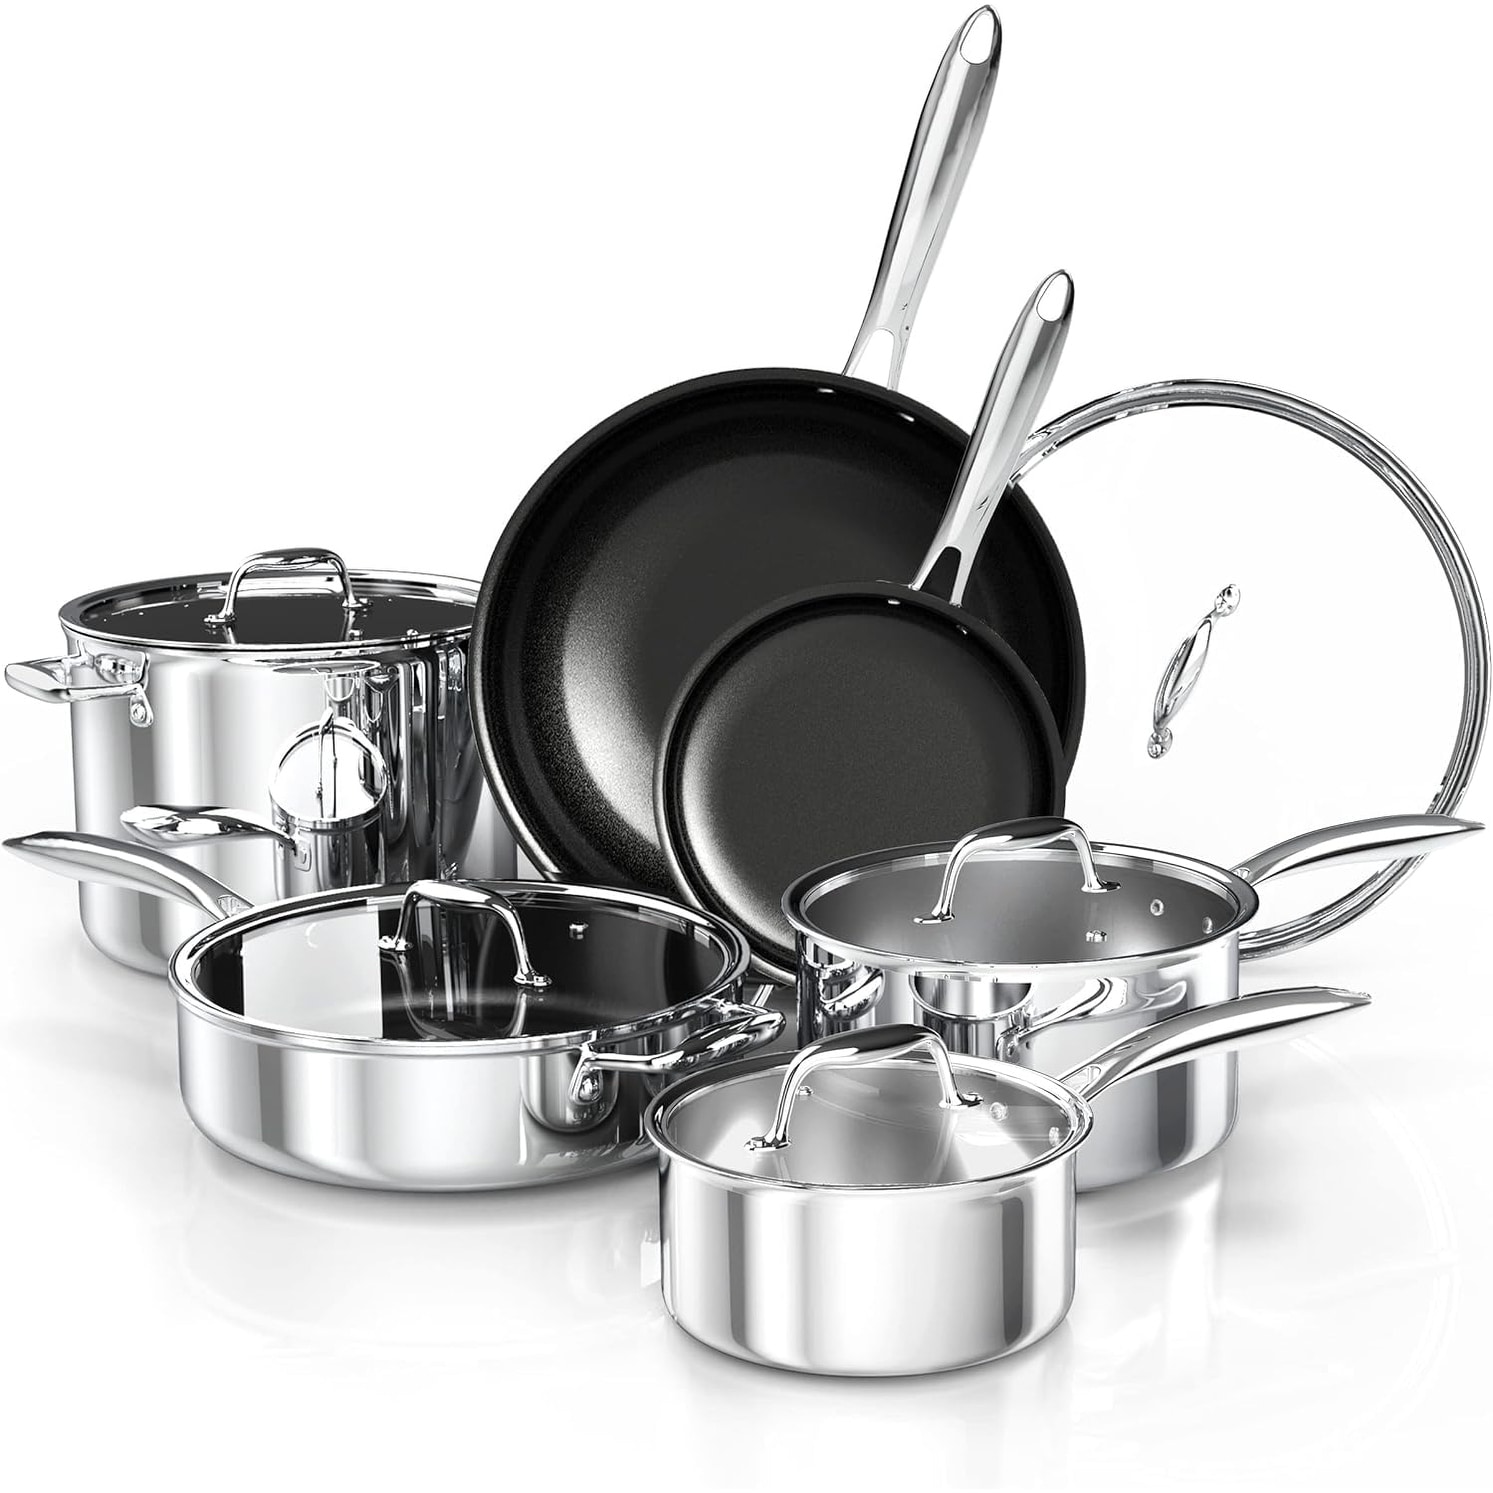 https://ak1.ostkcdn.com/images/products/is/images/direct/79b572d638cfb10ce664771e389fb506b58d4254/Stainless-Steel-Pots-and-Pans-Set%2C-11-Piece-Cookware-Sets-Nonstick-3-Ply-Kitchen-Cookware-Sets-for-Cooking-Cookware-Pot-Set.jpg